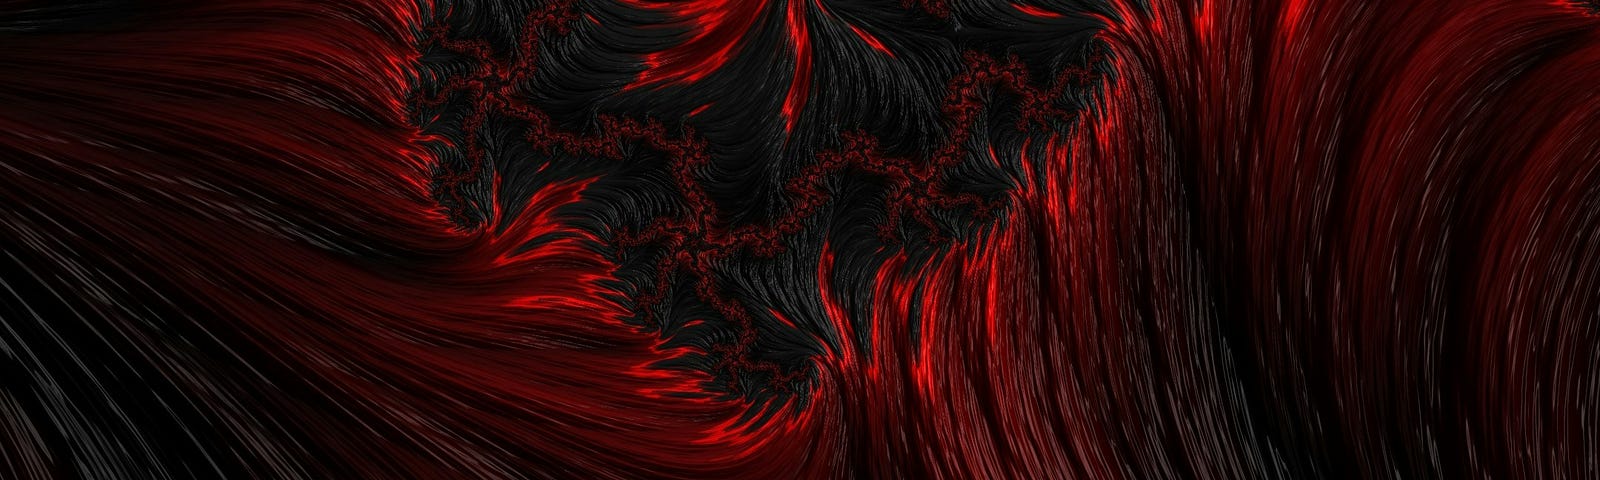 Abstract art with a black background and swirls of red, shiny, fibrous texture.